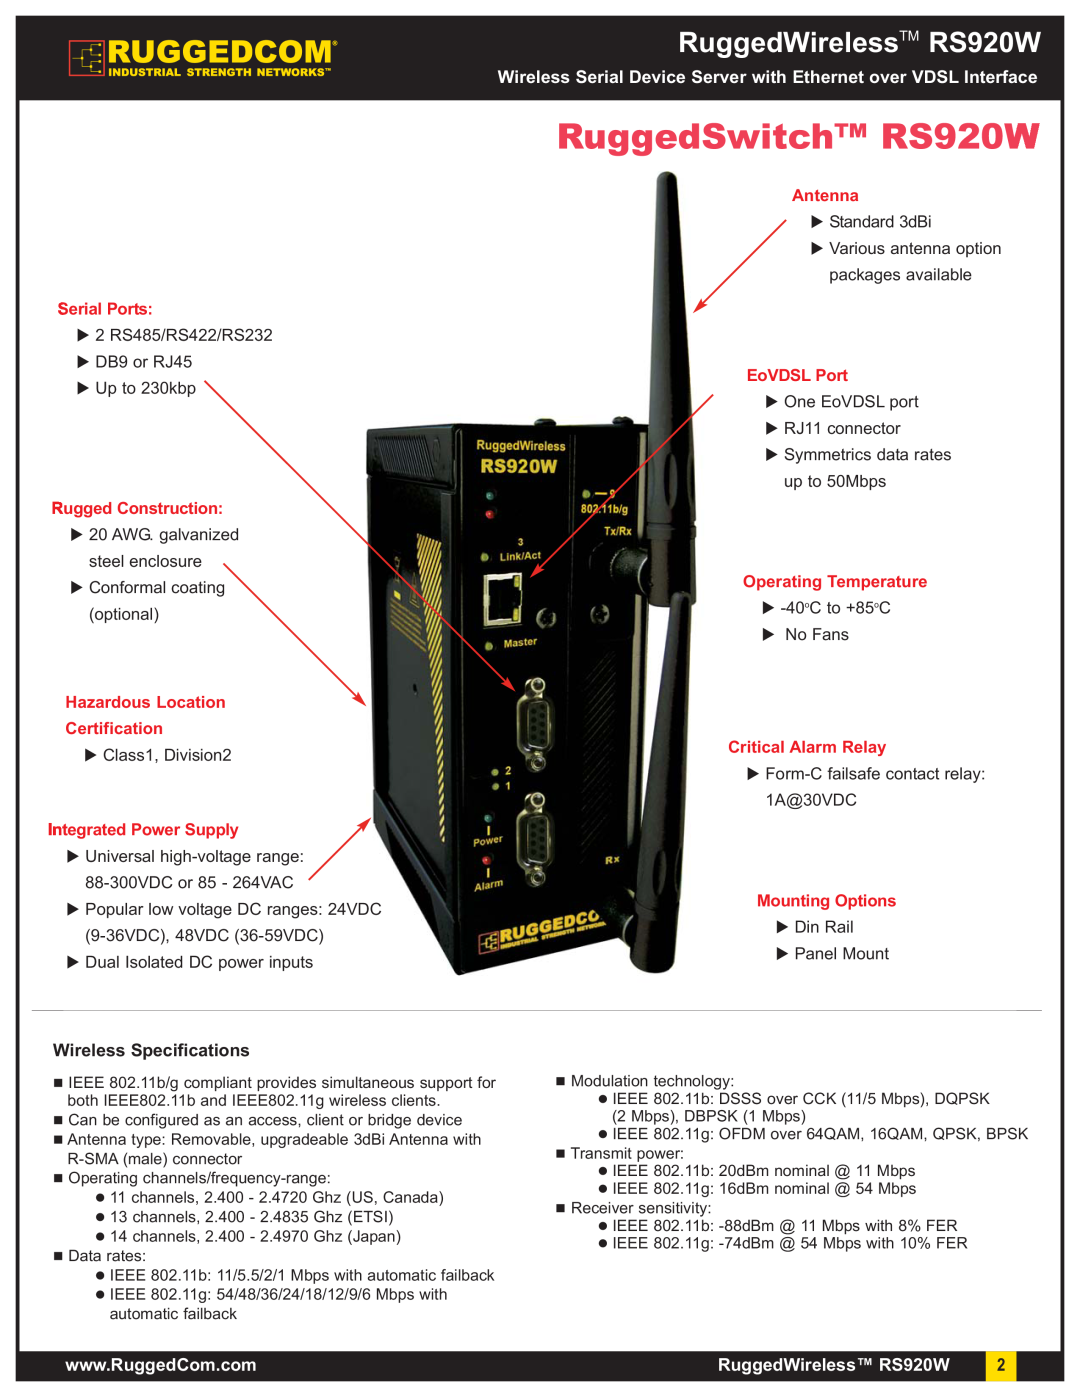 RuggedCom RuggedSwitch RS920W, Wireless Specifications, RuggedWirelessTM RS920W, Serial Ports, Rugged Construction 